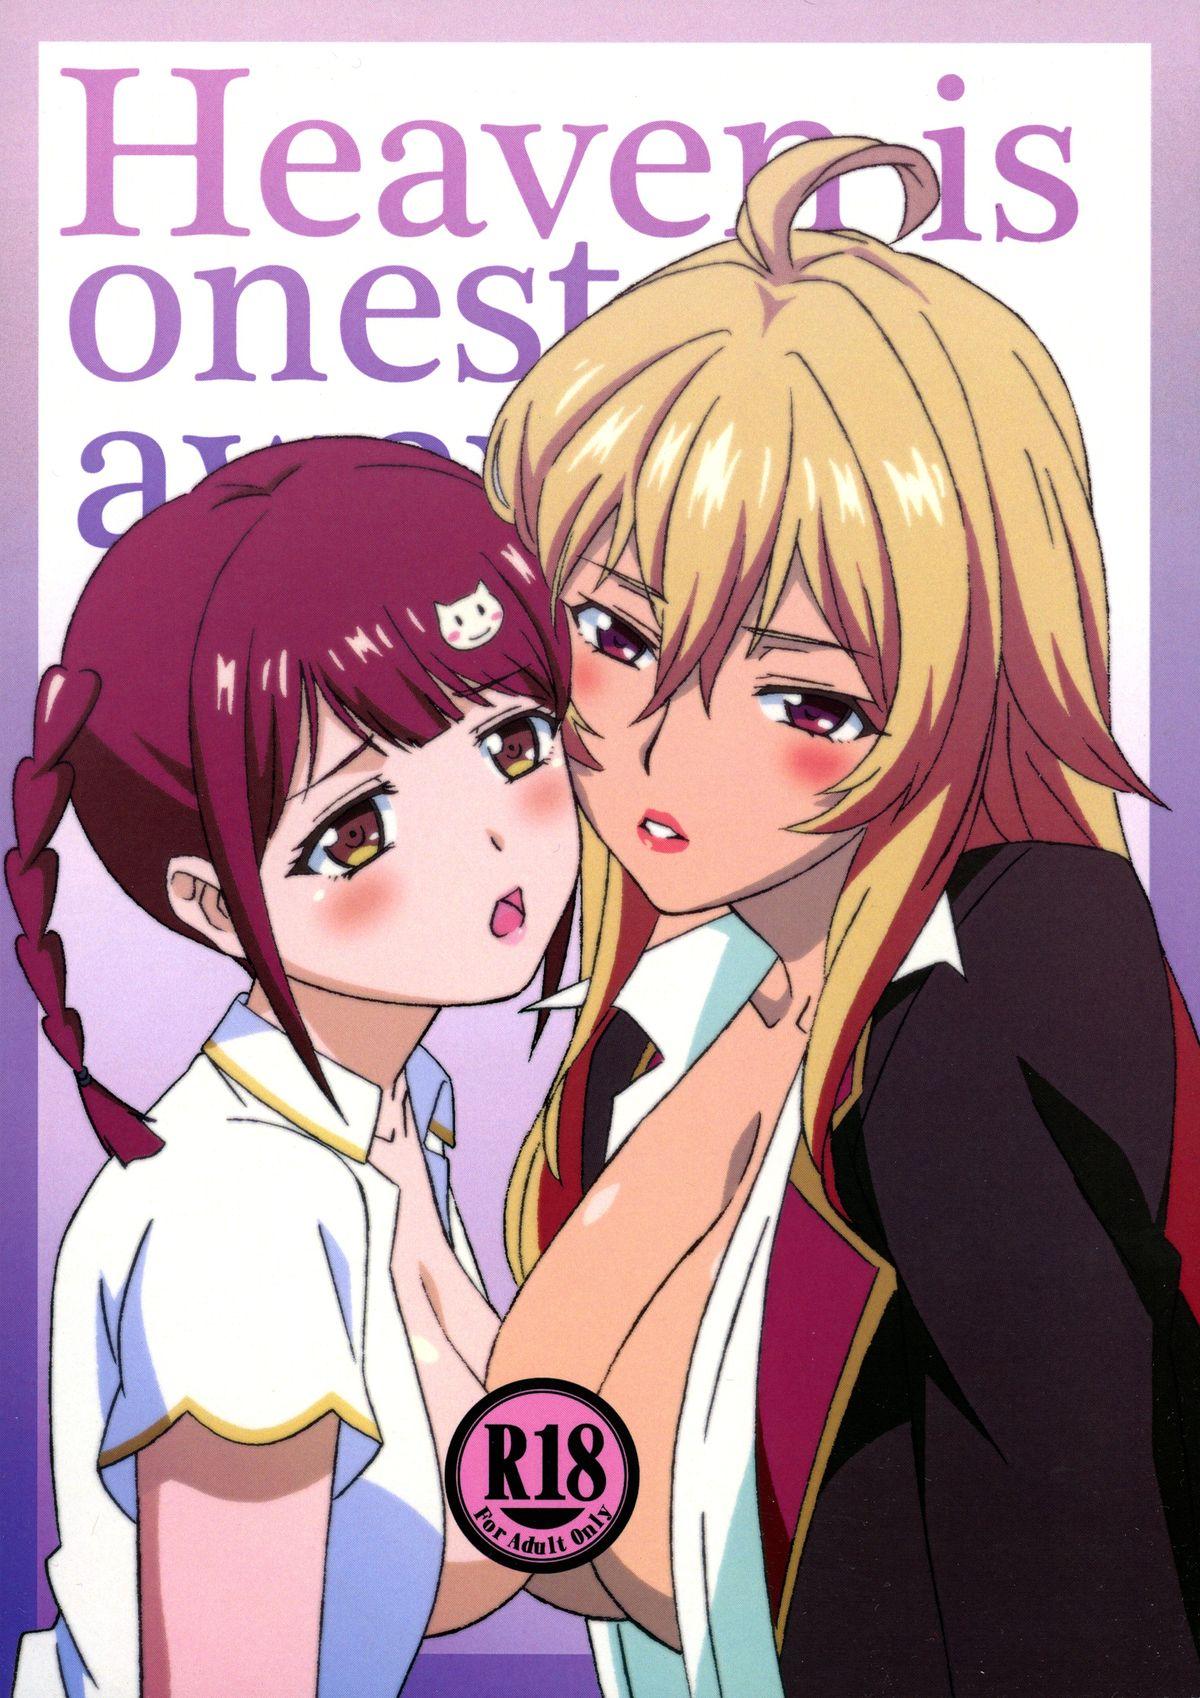 Ssbbw Heaven is one step away 2 - Valkyrie drive Hardcore Porn - Page 1